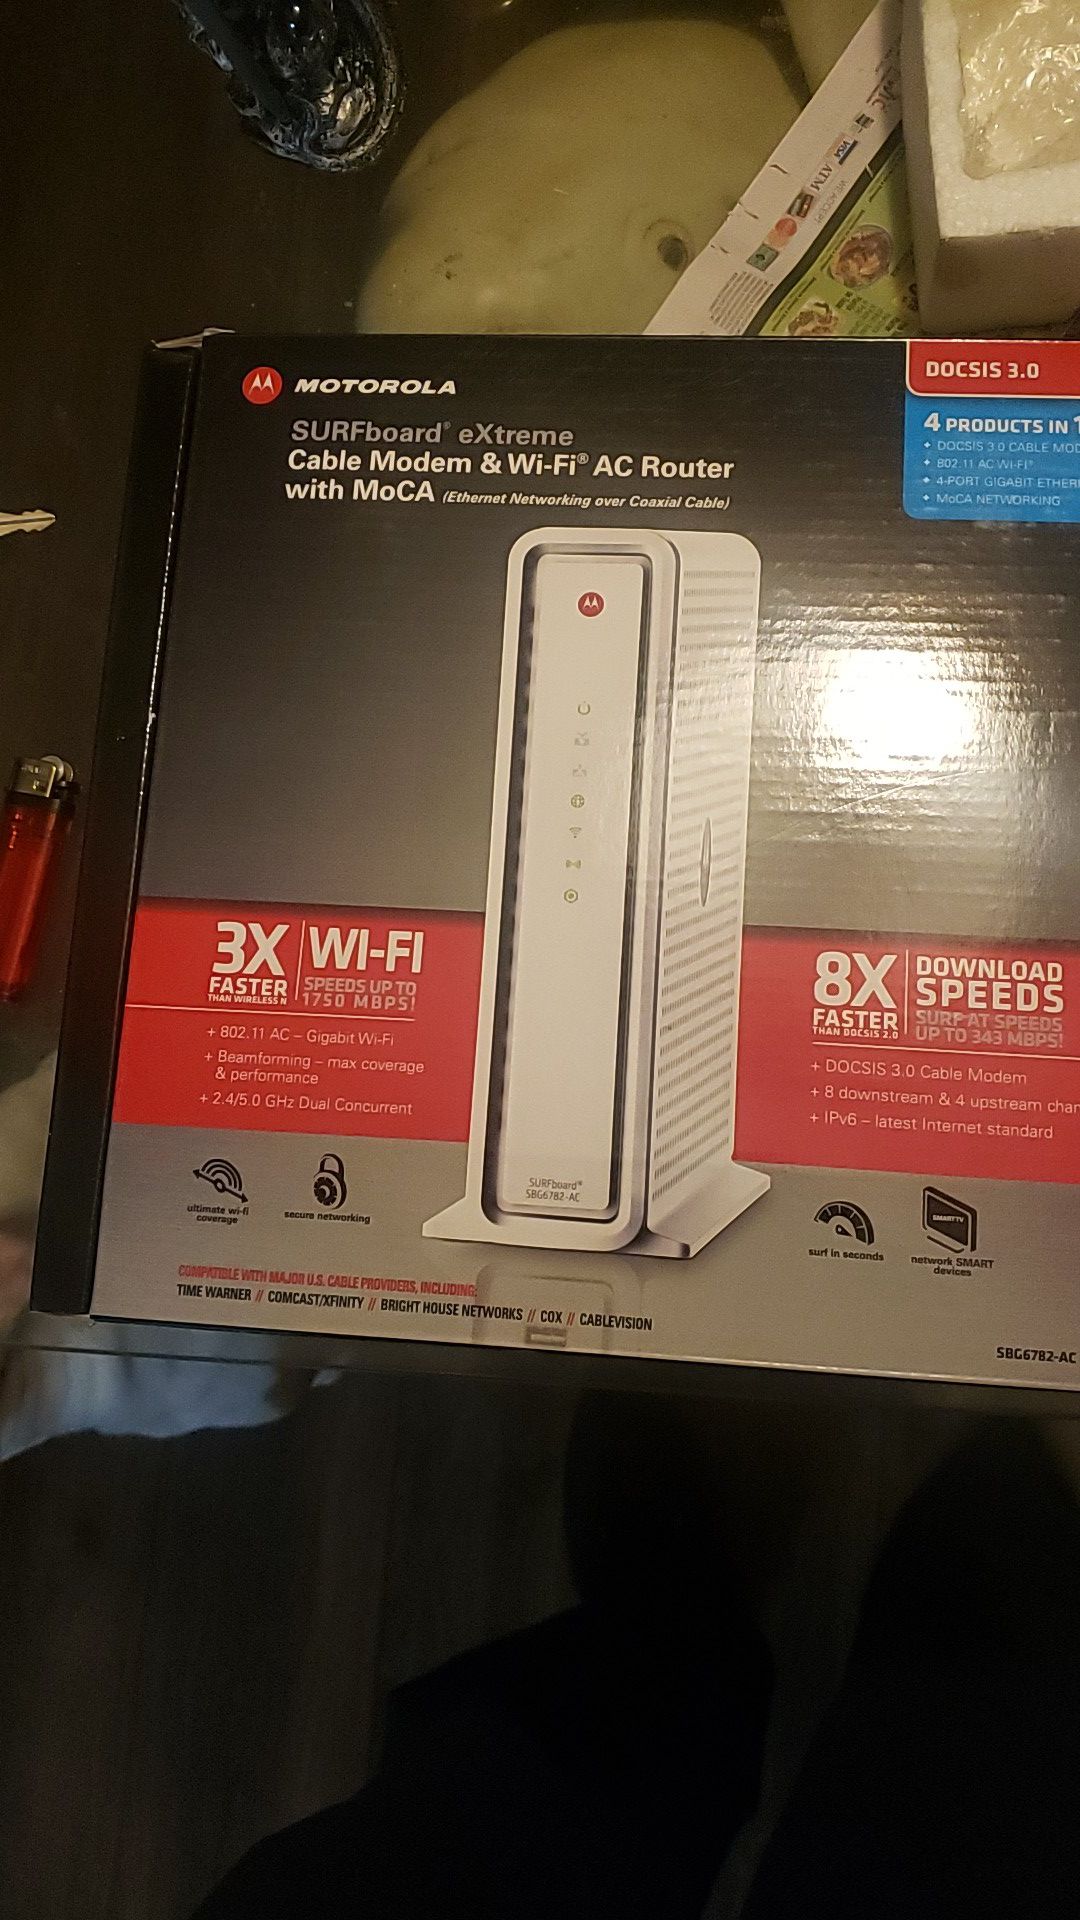 Motorola SURFBOARD extreme Cable Modem & Wifi AC Router with MoCa